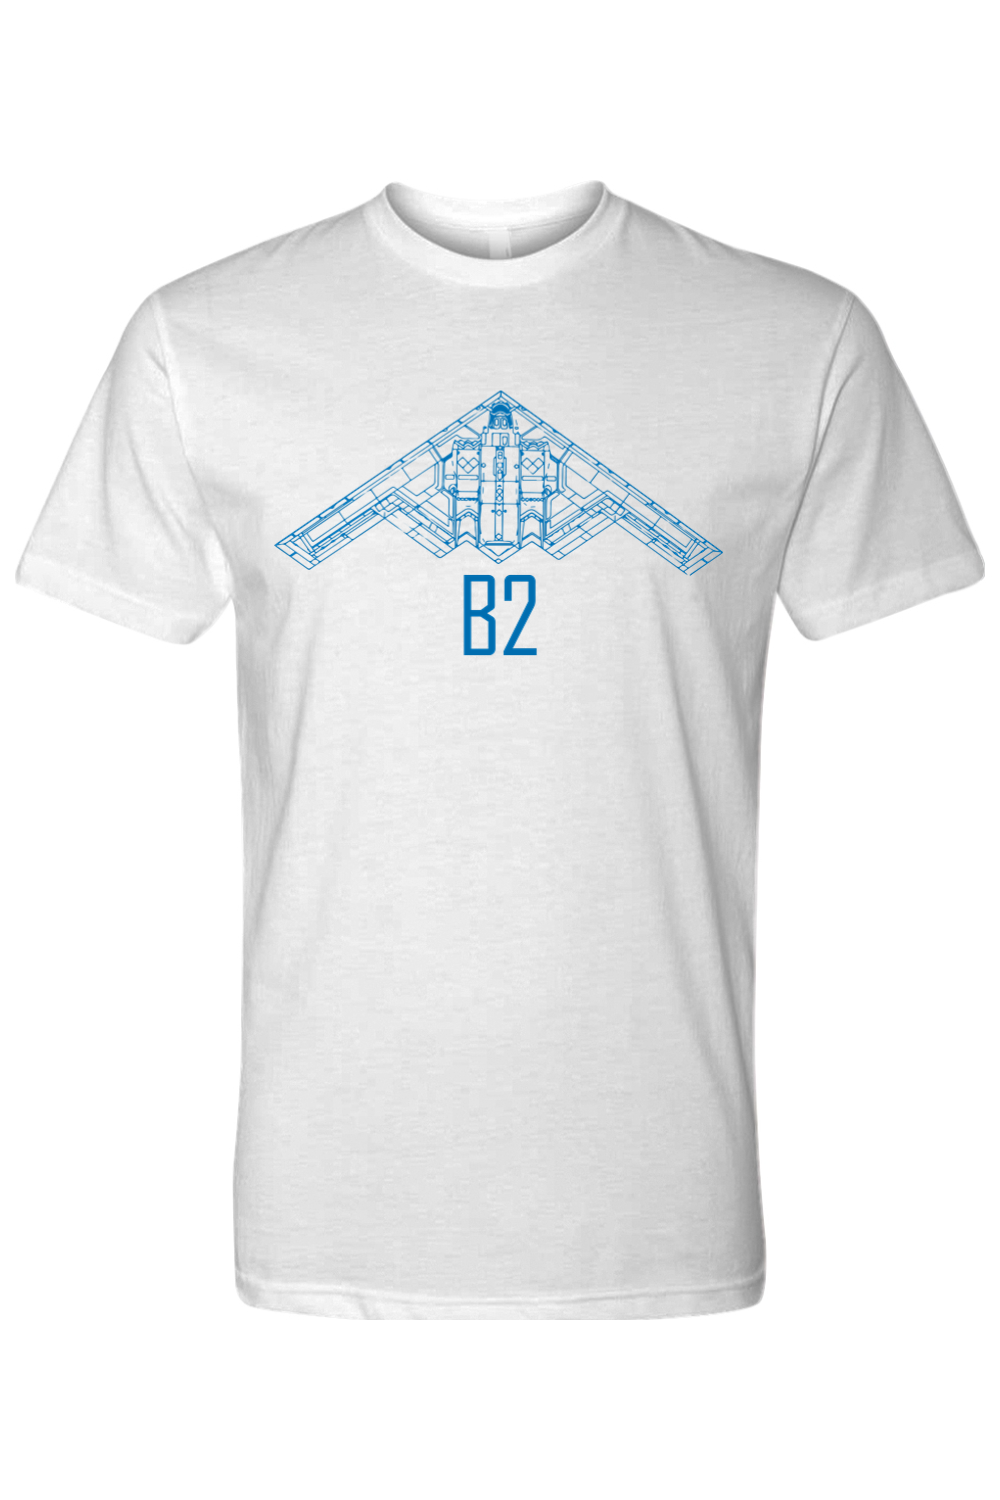 B2 Stealth Bomber Tee - Branch 32